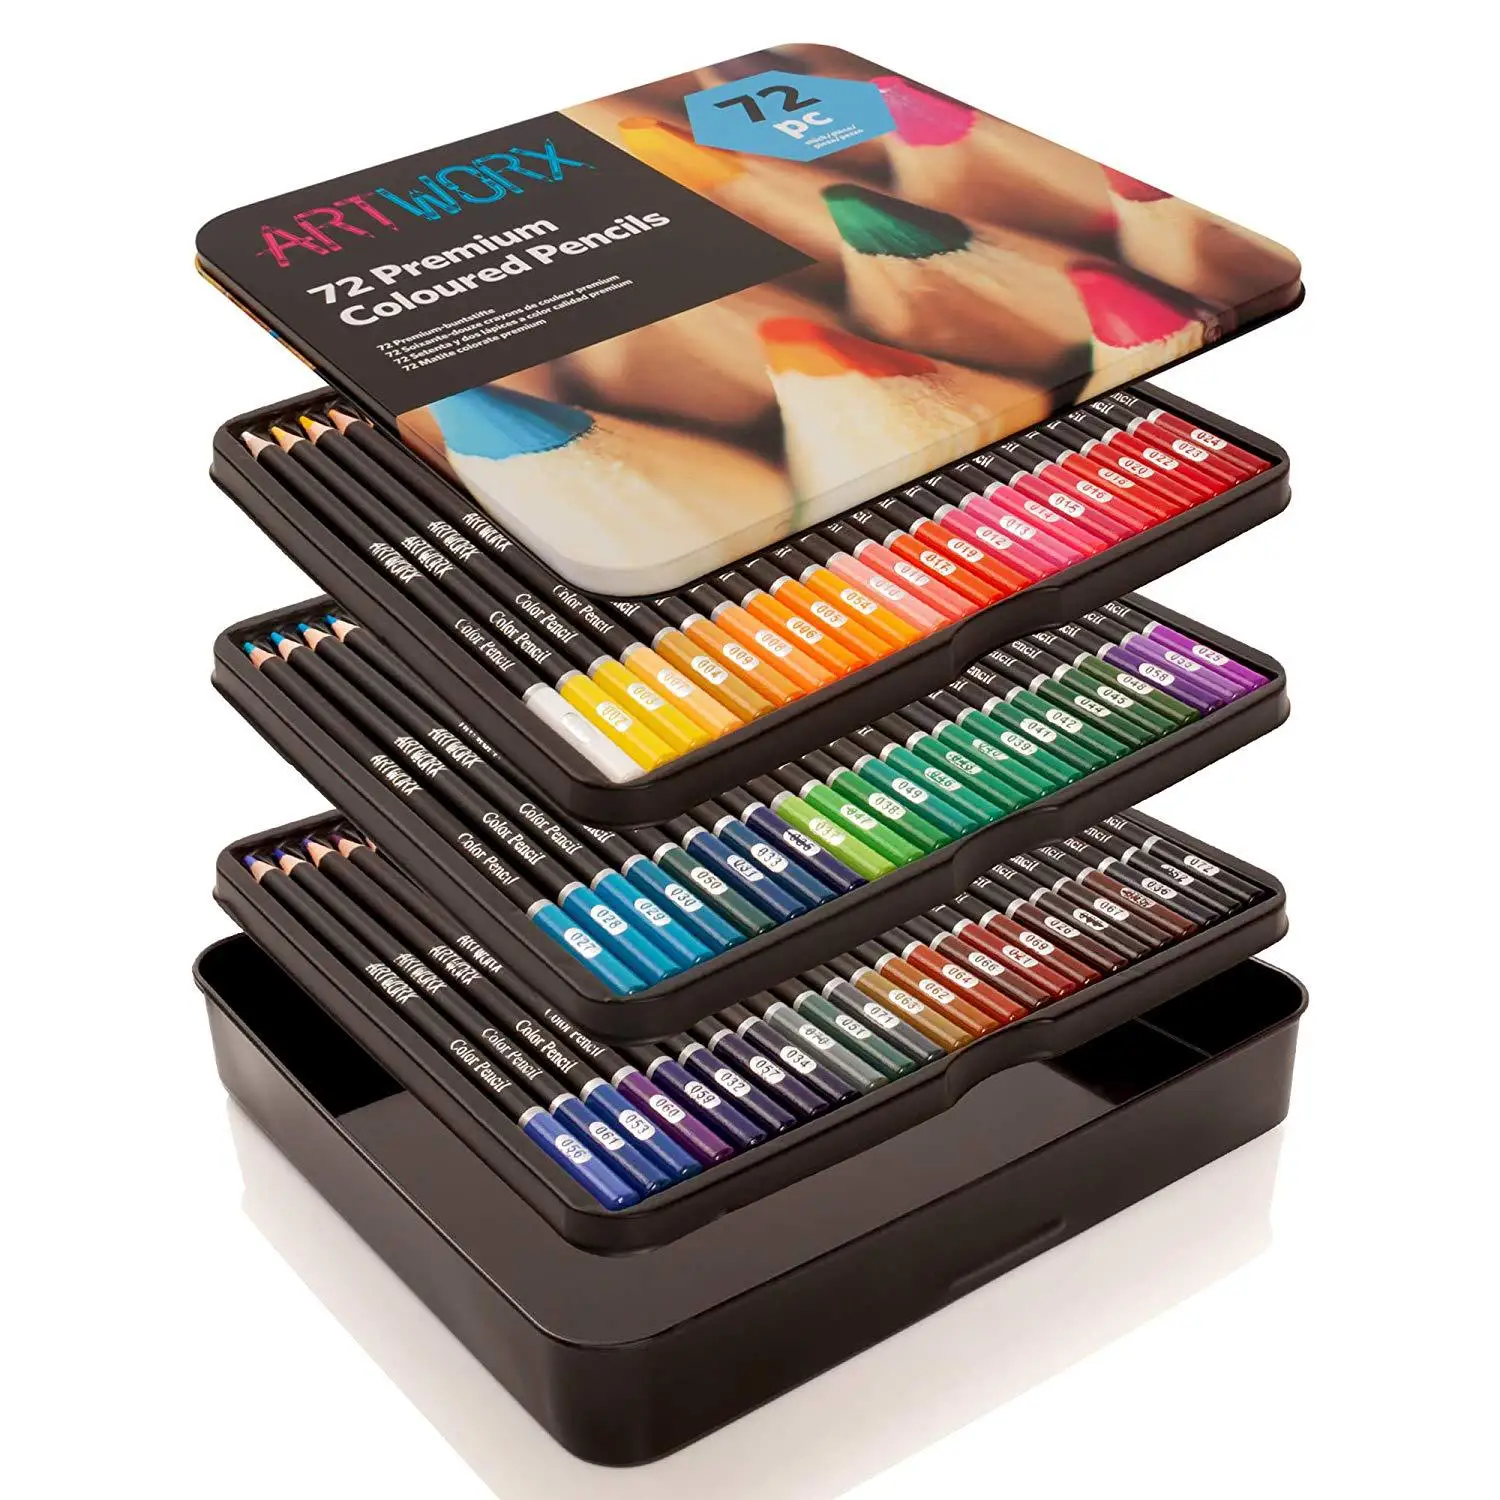 https://ae01.alicdn.com/kf/S03a98530e25f4d7c922e88734795f515Y/Colored-Pencils-for-Adult-Coloring-Book-Set-of-72-Colors-Artists-Soft-Core-with-Vibrant-Color.jpg